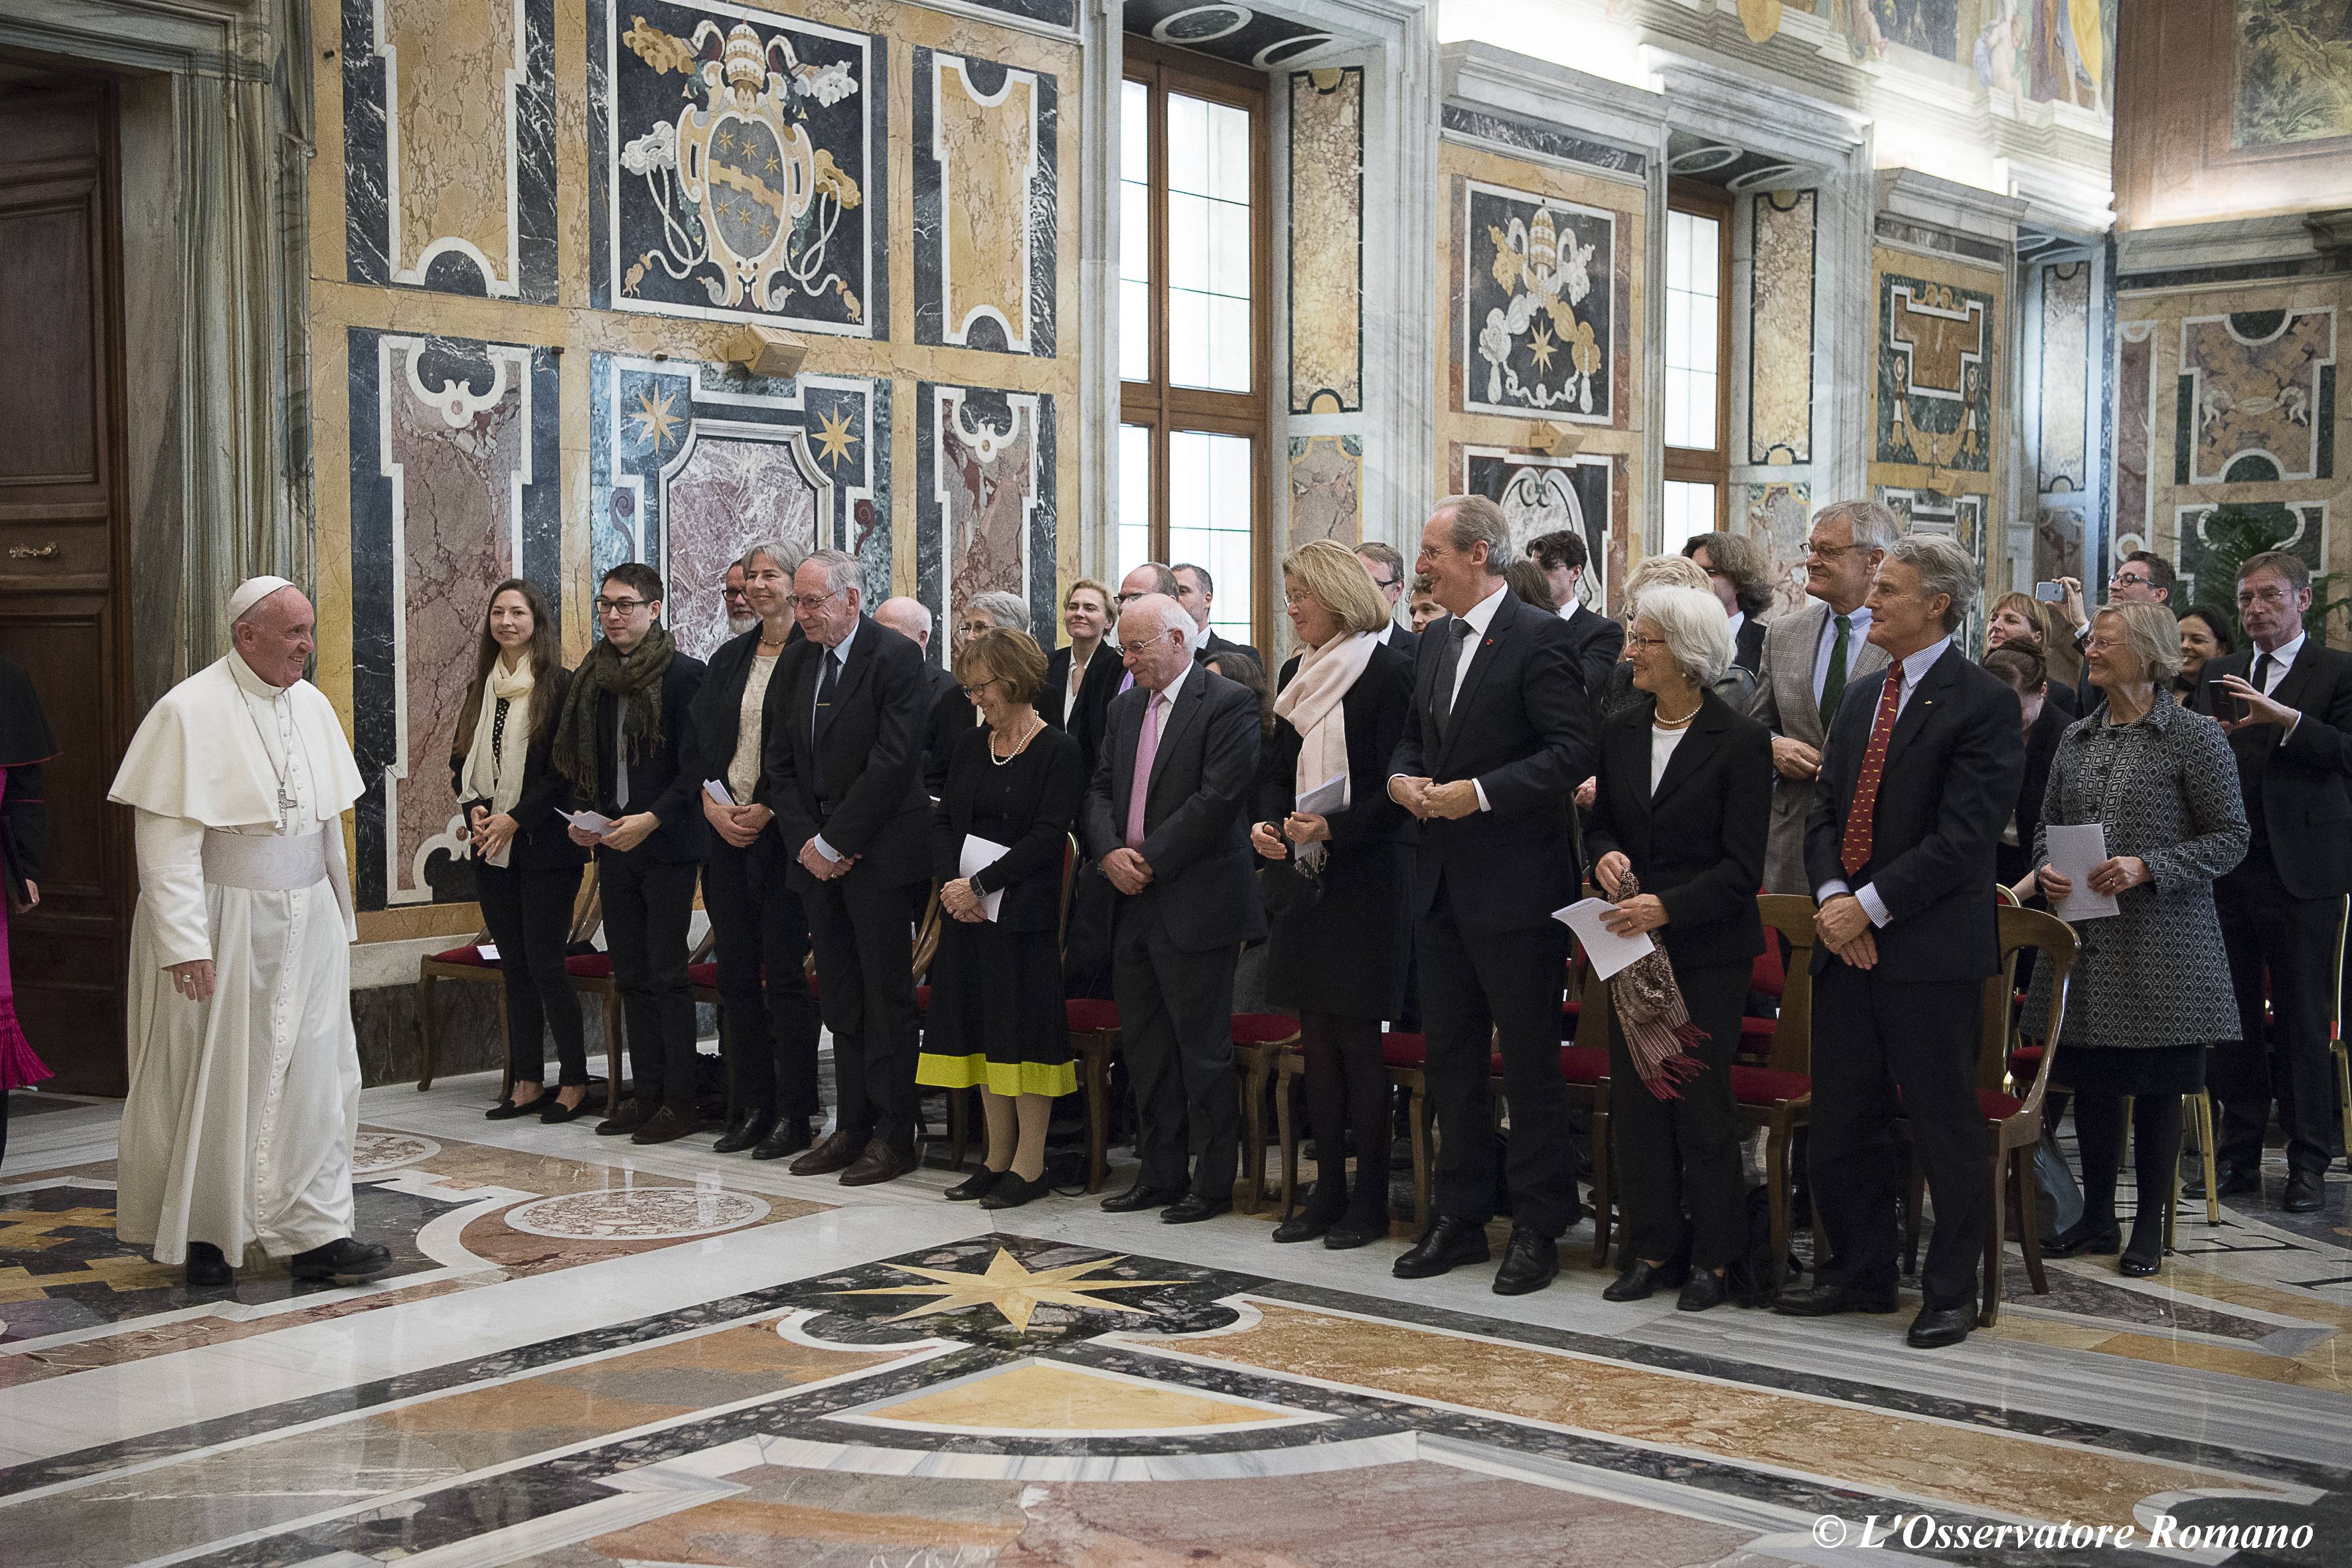 Pope Francis receives in audience members of the Romano Guardini Foundation